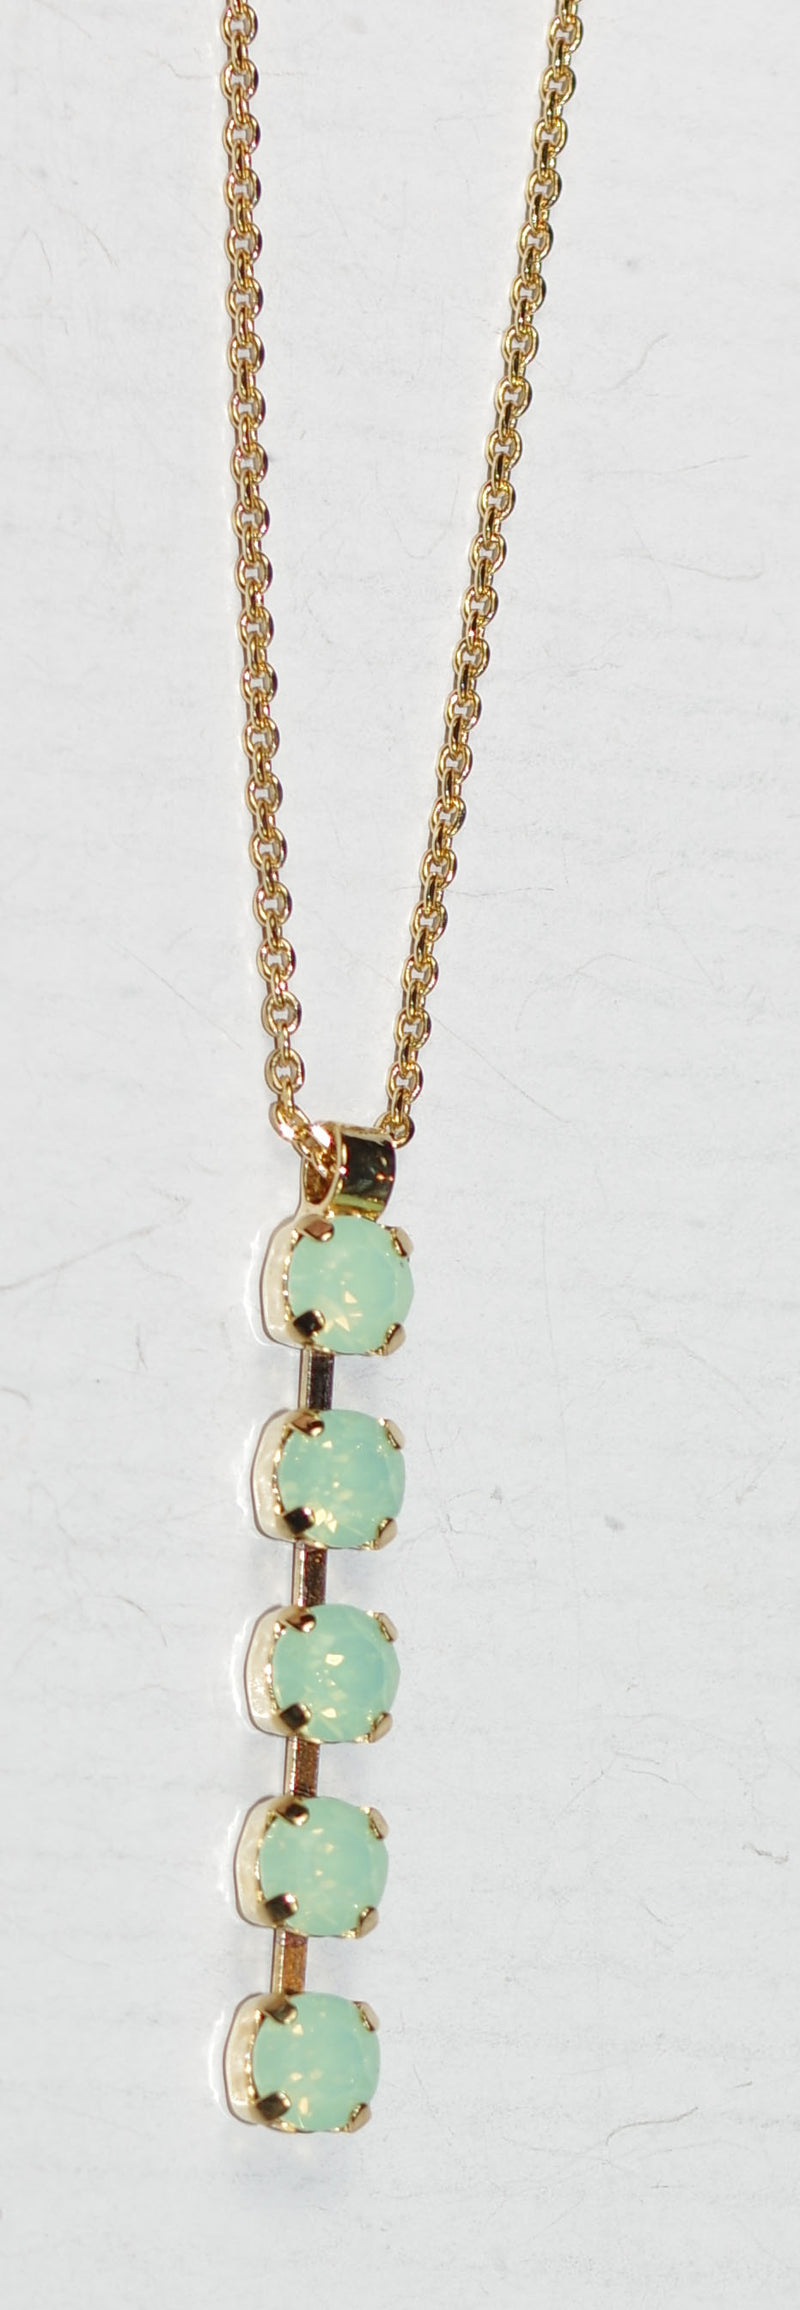 MARIANA PENDANT: green stones in 2" yellow gold setting, 19" adjustable chain